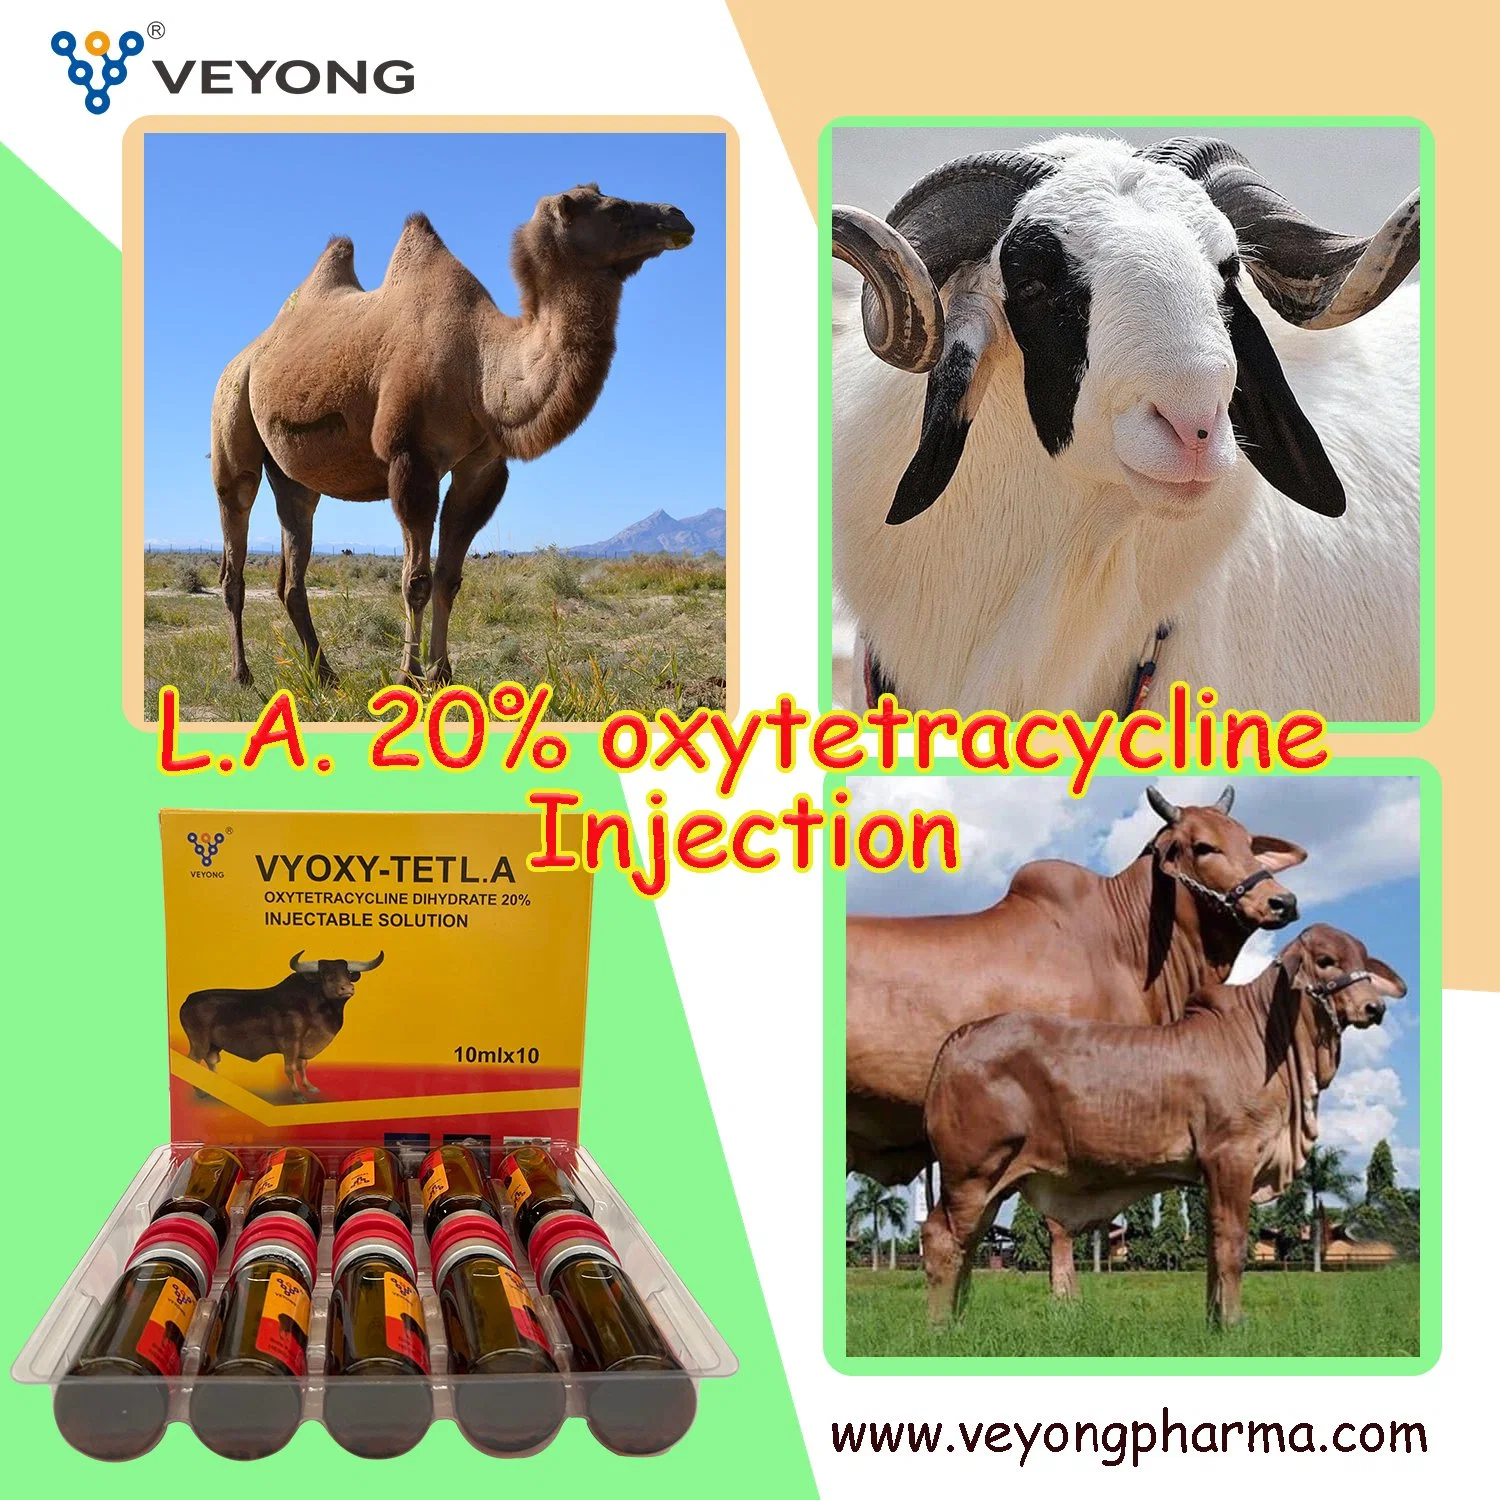 Pharmaceutical Veterinary Medicine Oxytetracycline Injection 10%, 20%, 30% GMP Certified Manufacturer Wholesaler